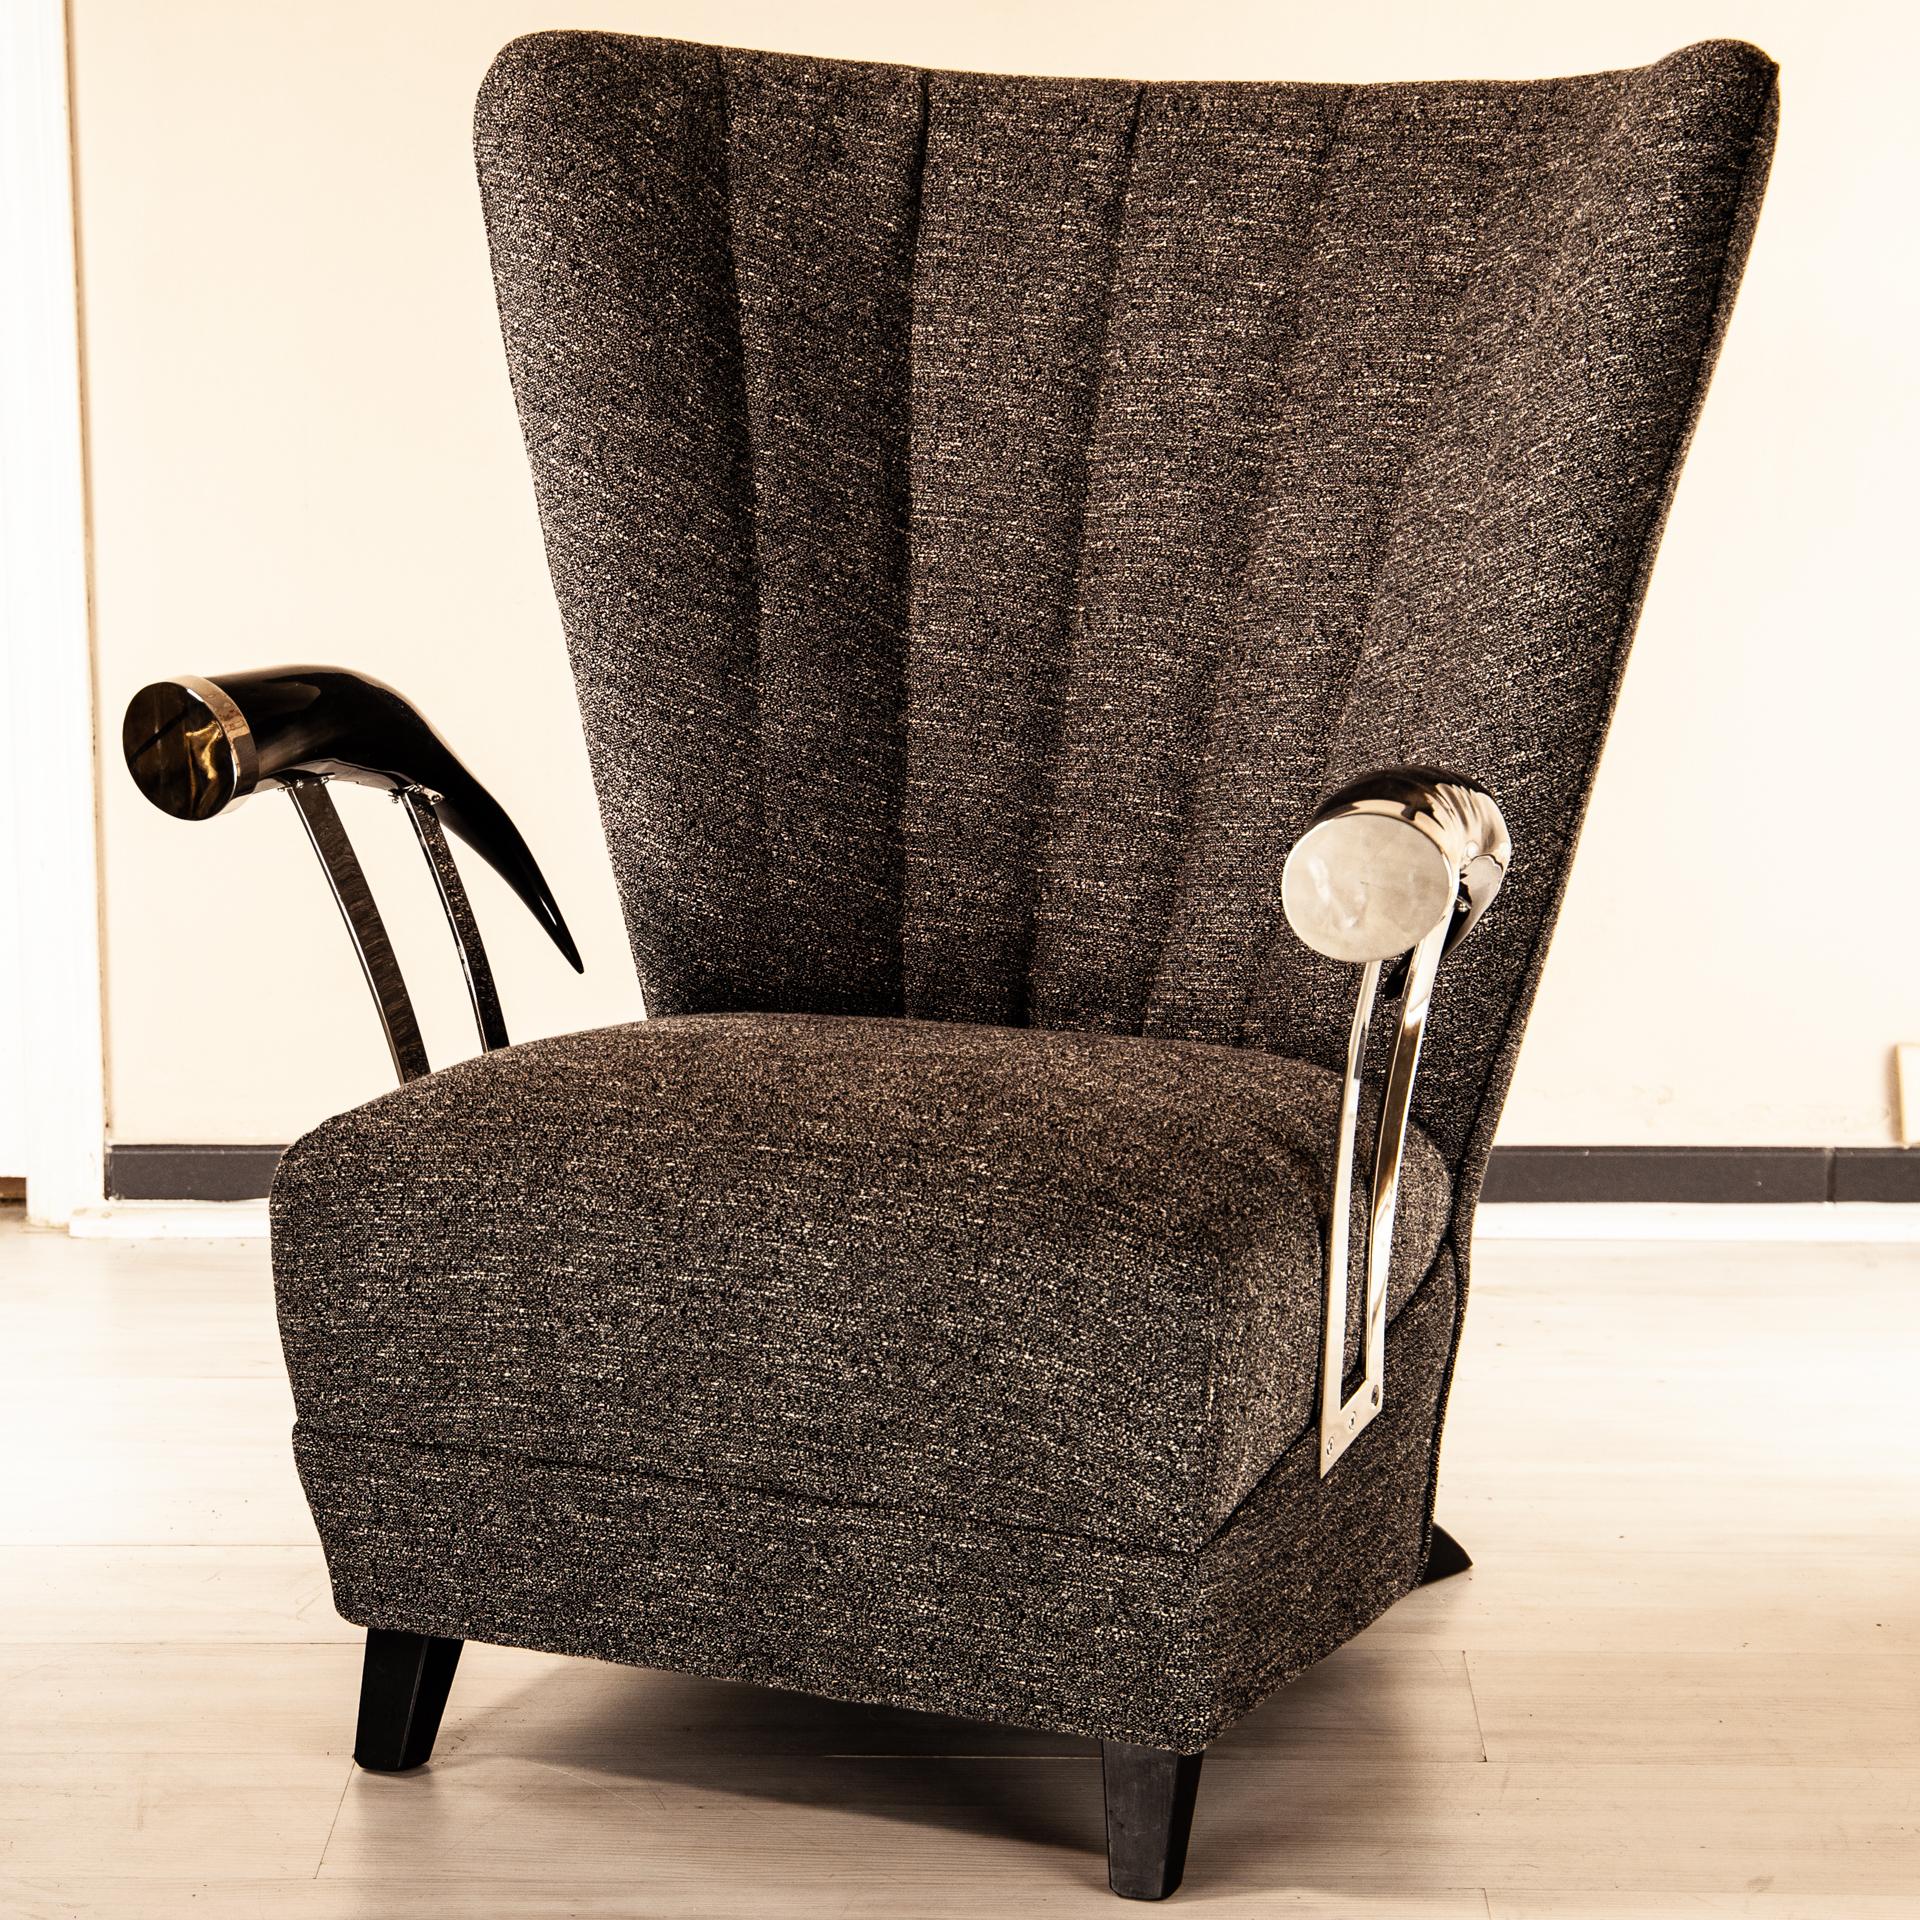 Imposing lounge armchairwith American natural Horn arm-rest. Horns are capped with brass that is made to fit and armrest holder gives a stilish modern design touch.

Upholstered and manufactured in Florence, Tuscany by Selezioni Domus.

Shown in